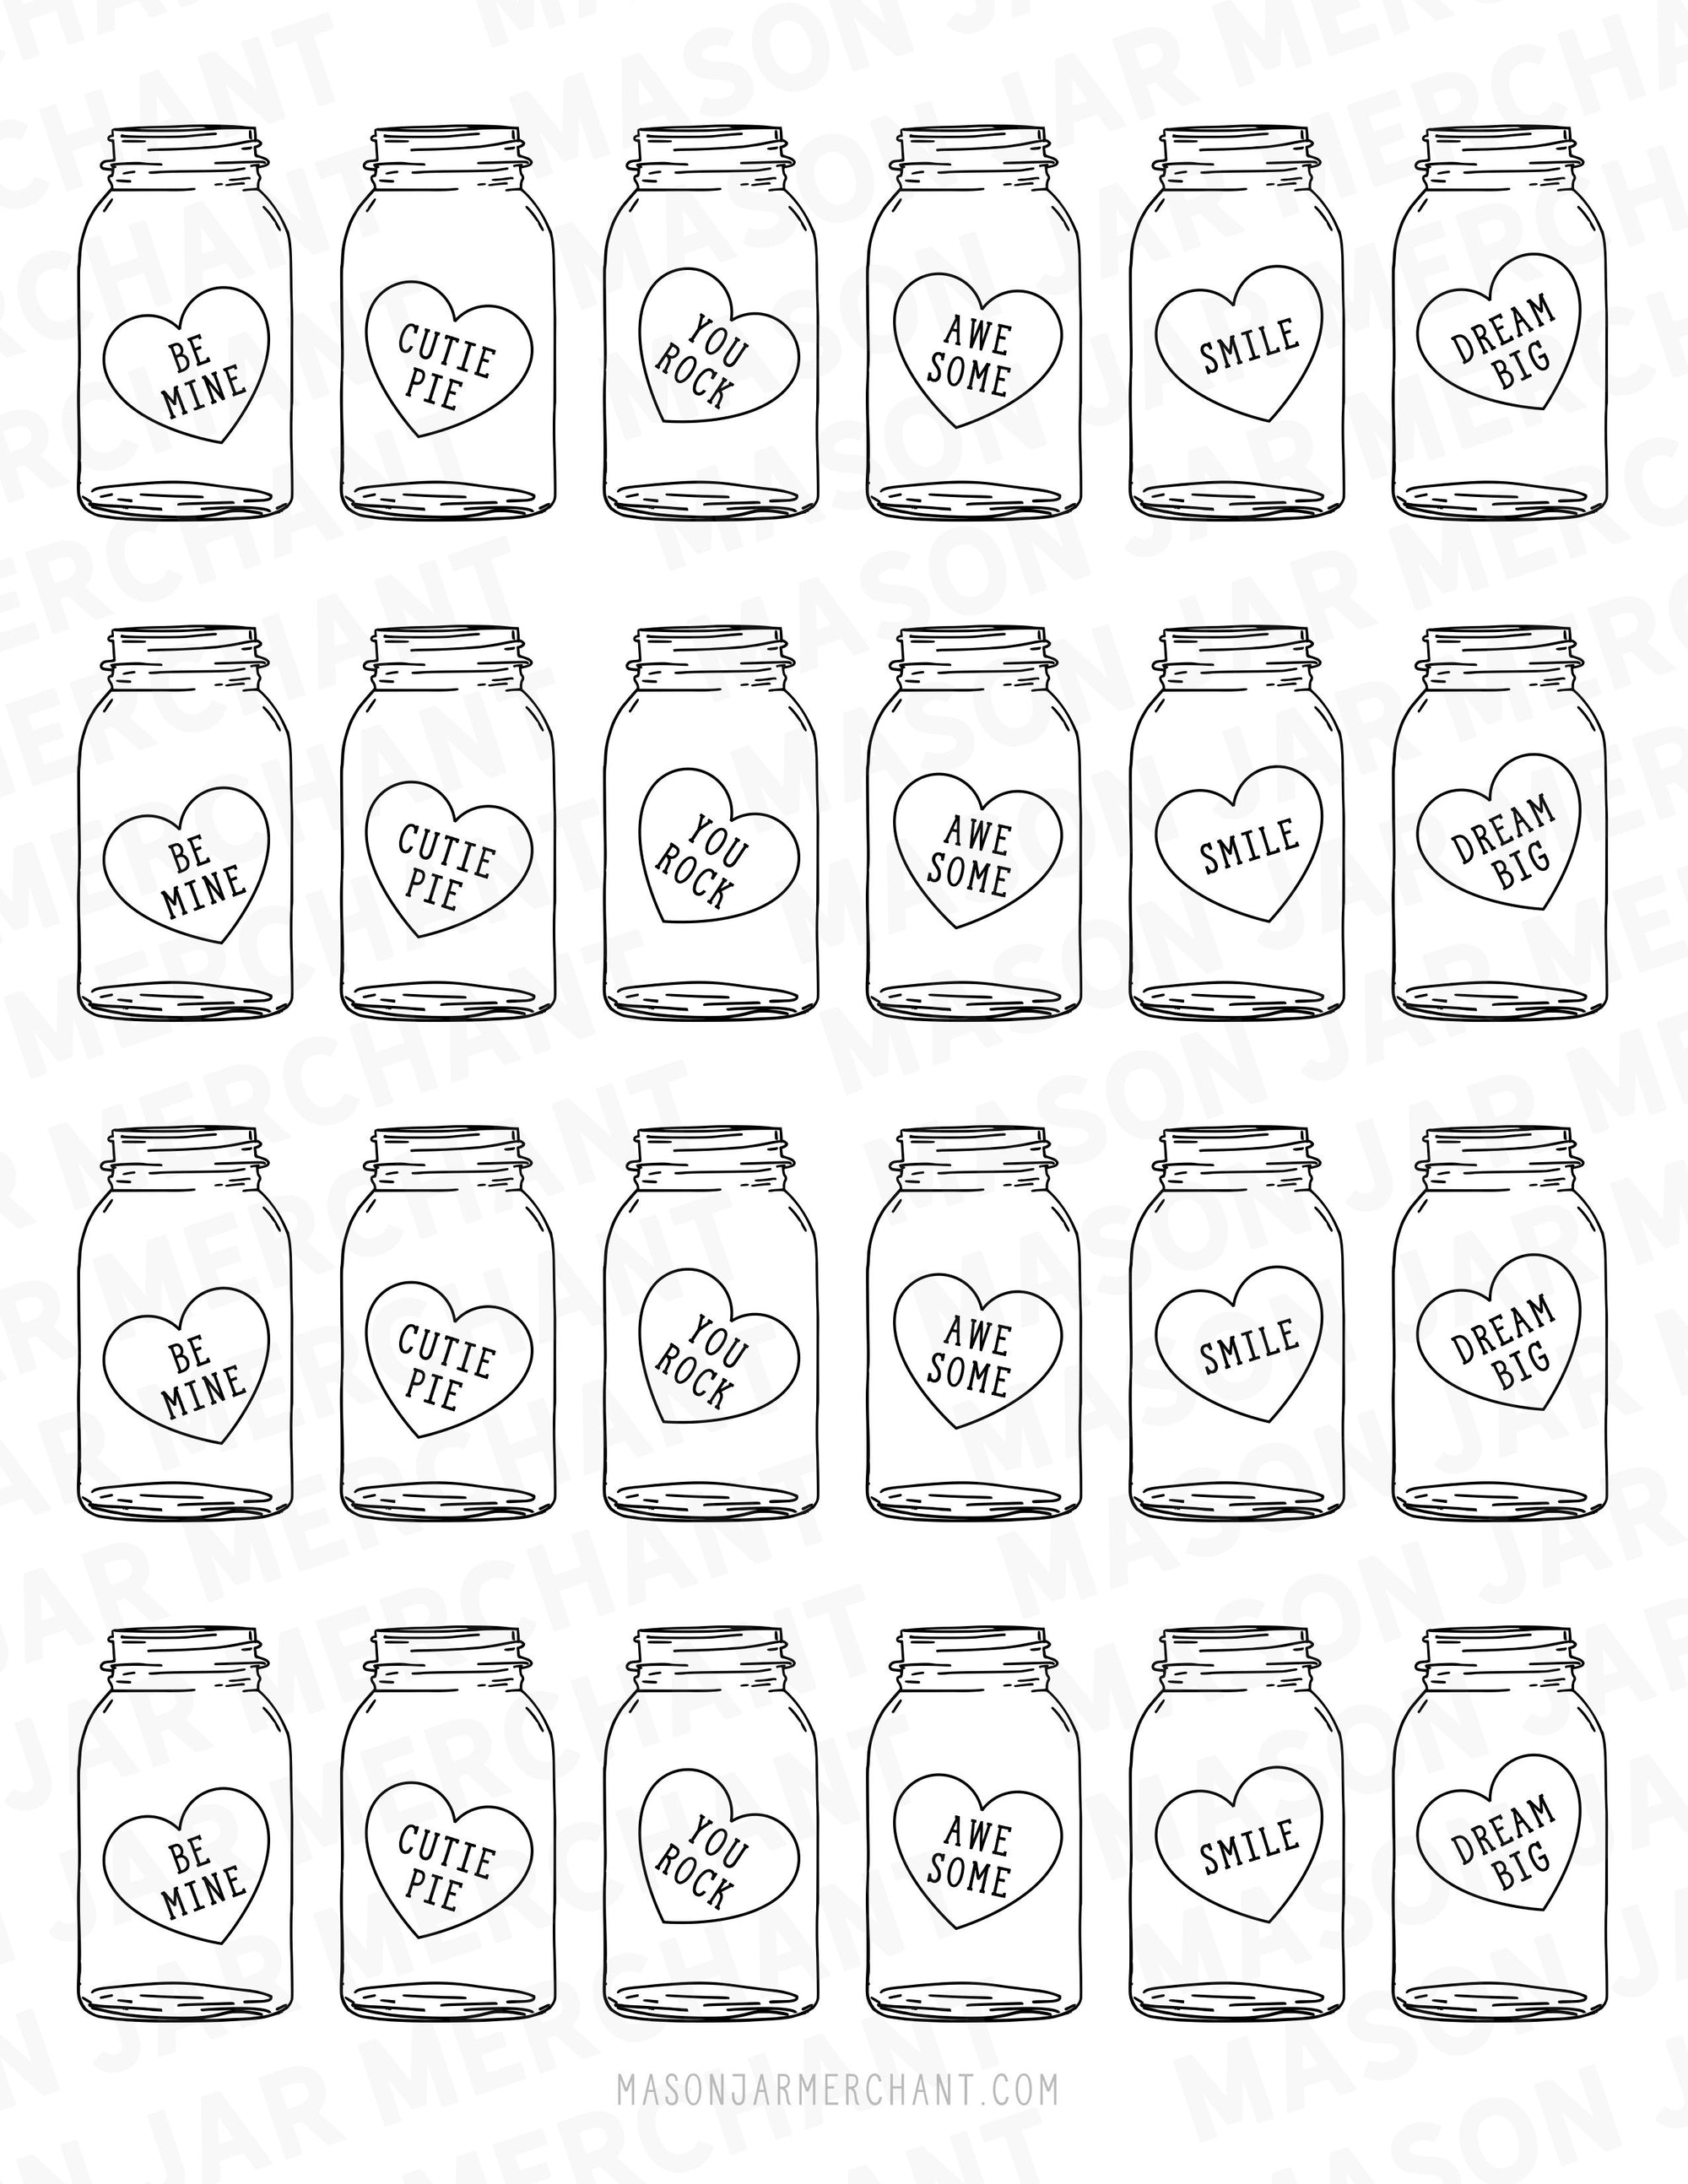 black and white candy heart mason jar shaped valentines Studio3 download color and cut and use as gift tags